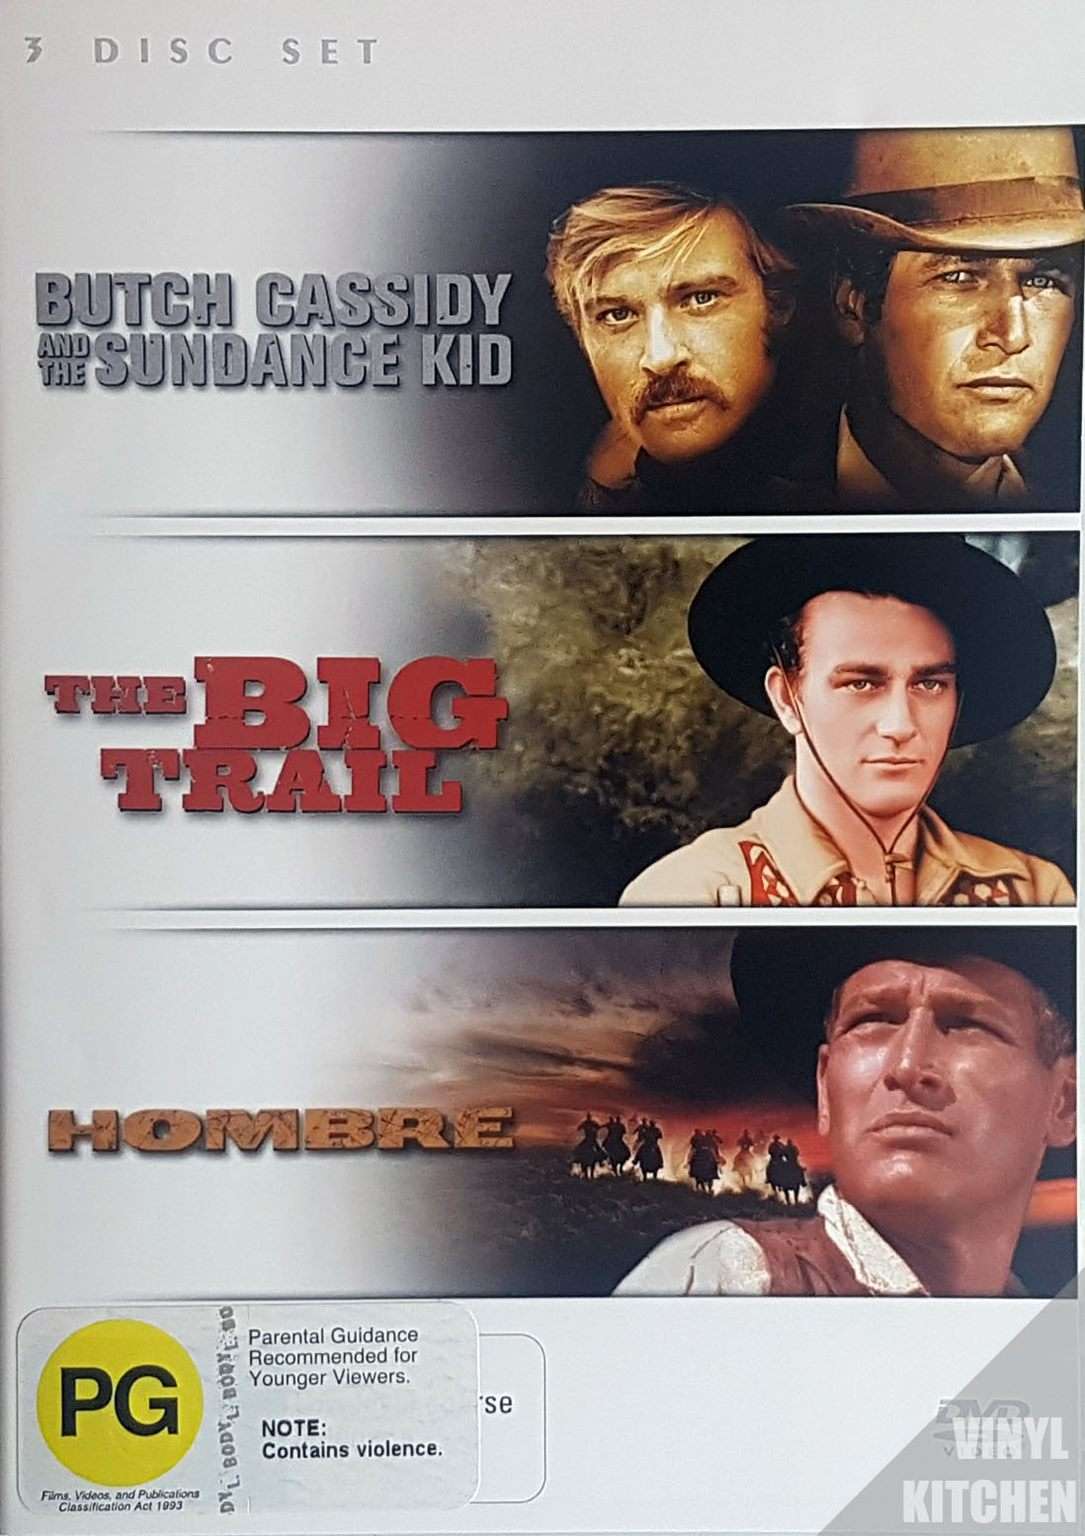 Butch Cassidy and the Sundance Kid / The Big Trail / Hombre